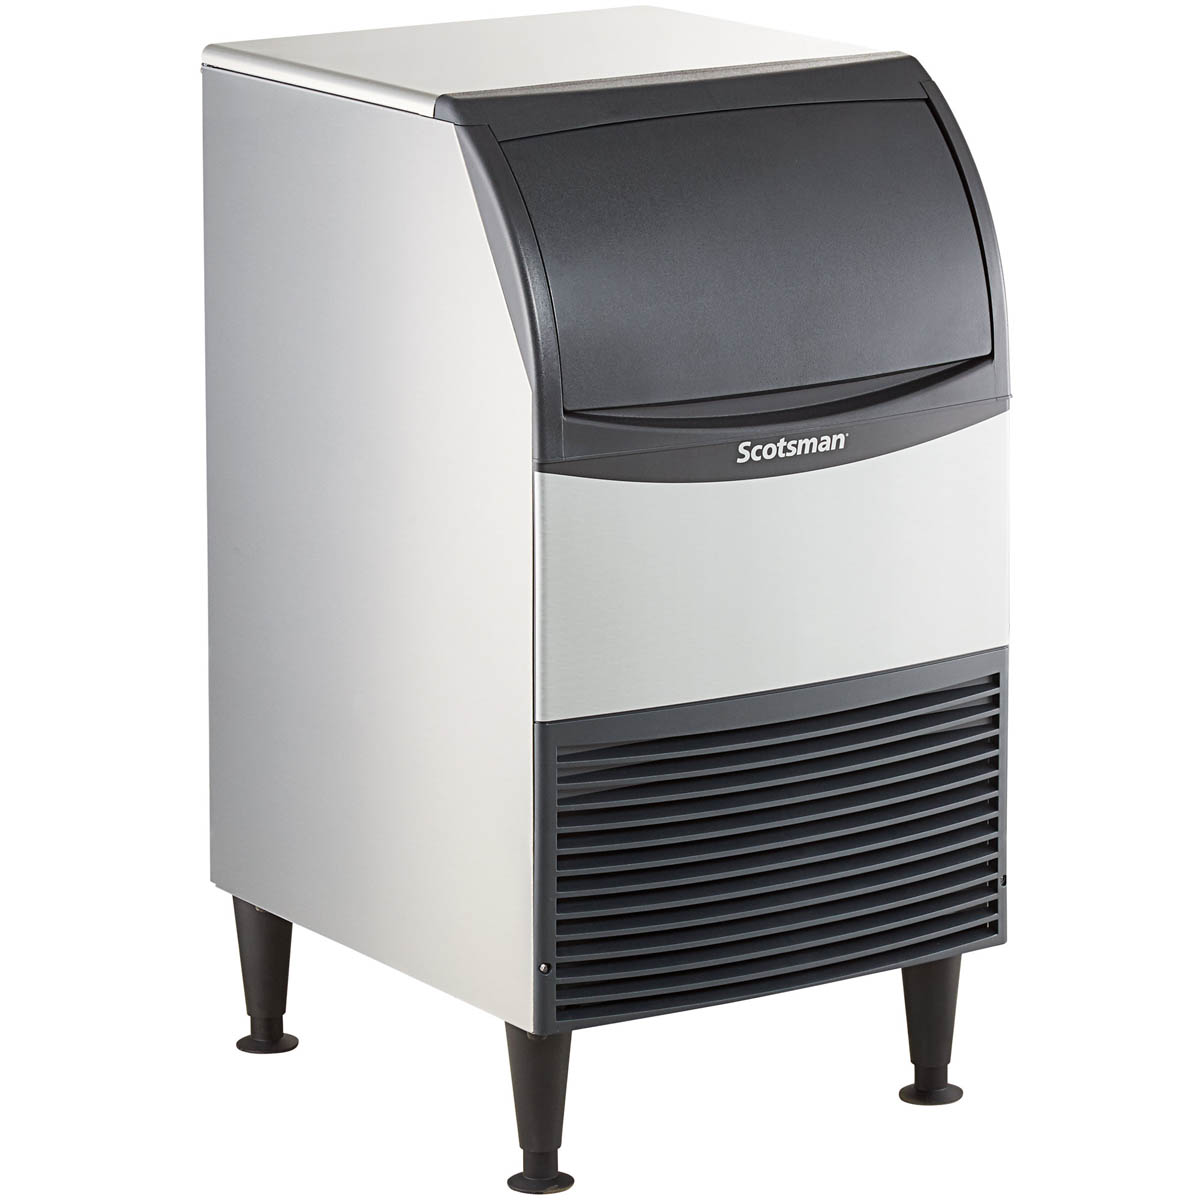 Scotsman UF2020A-1 Air-Cooled Flake-Style Ice Maker with Bin, 216 lbs/Day